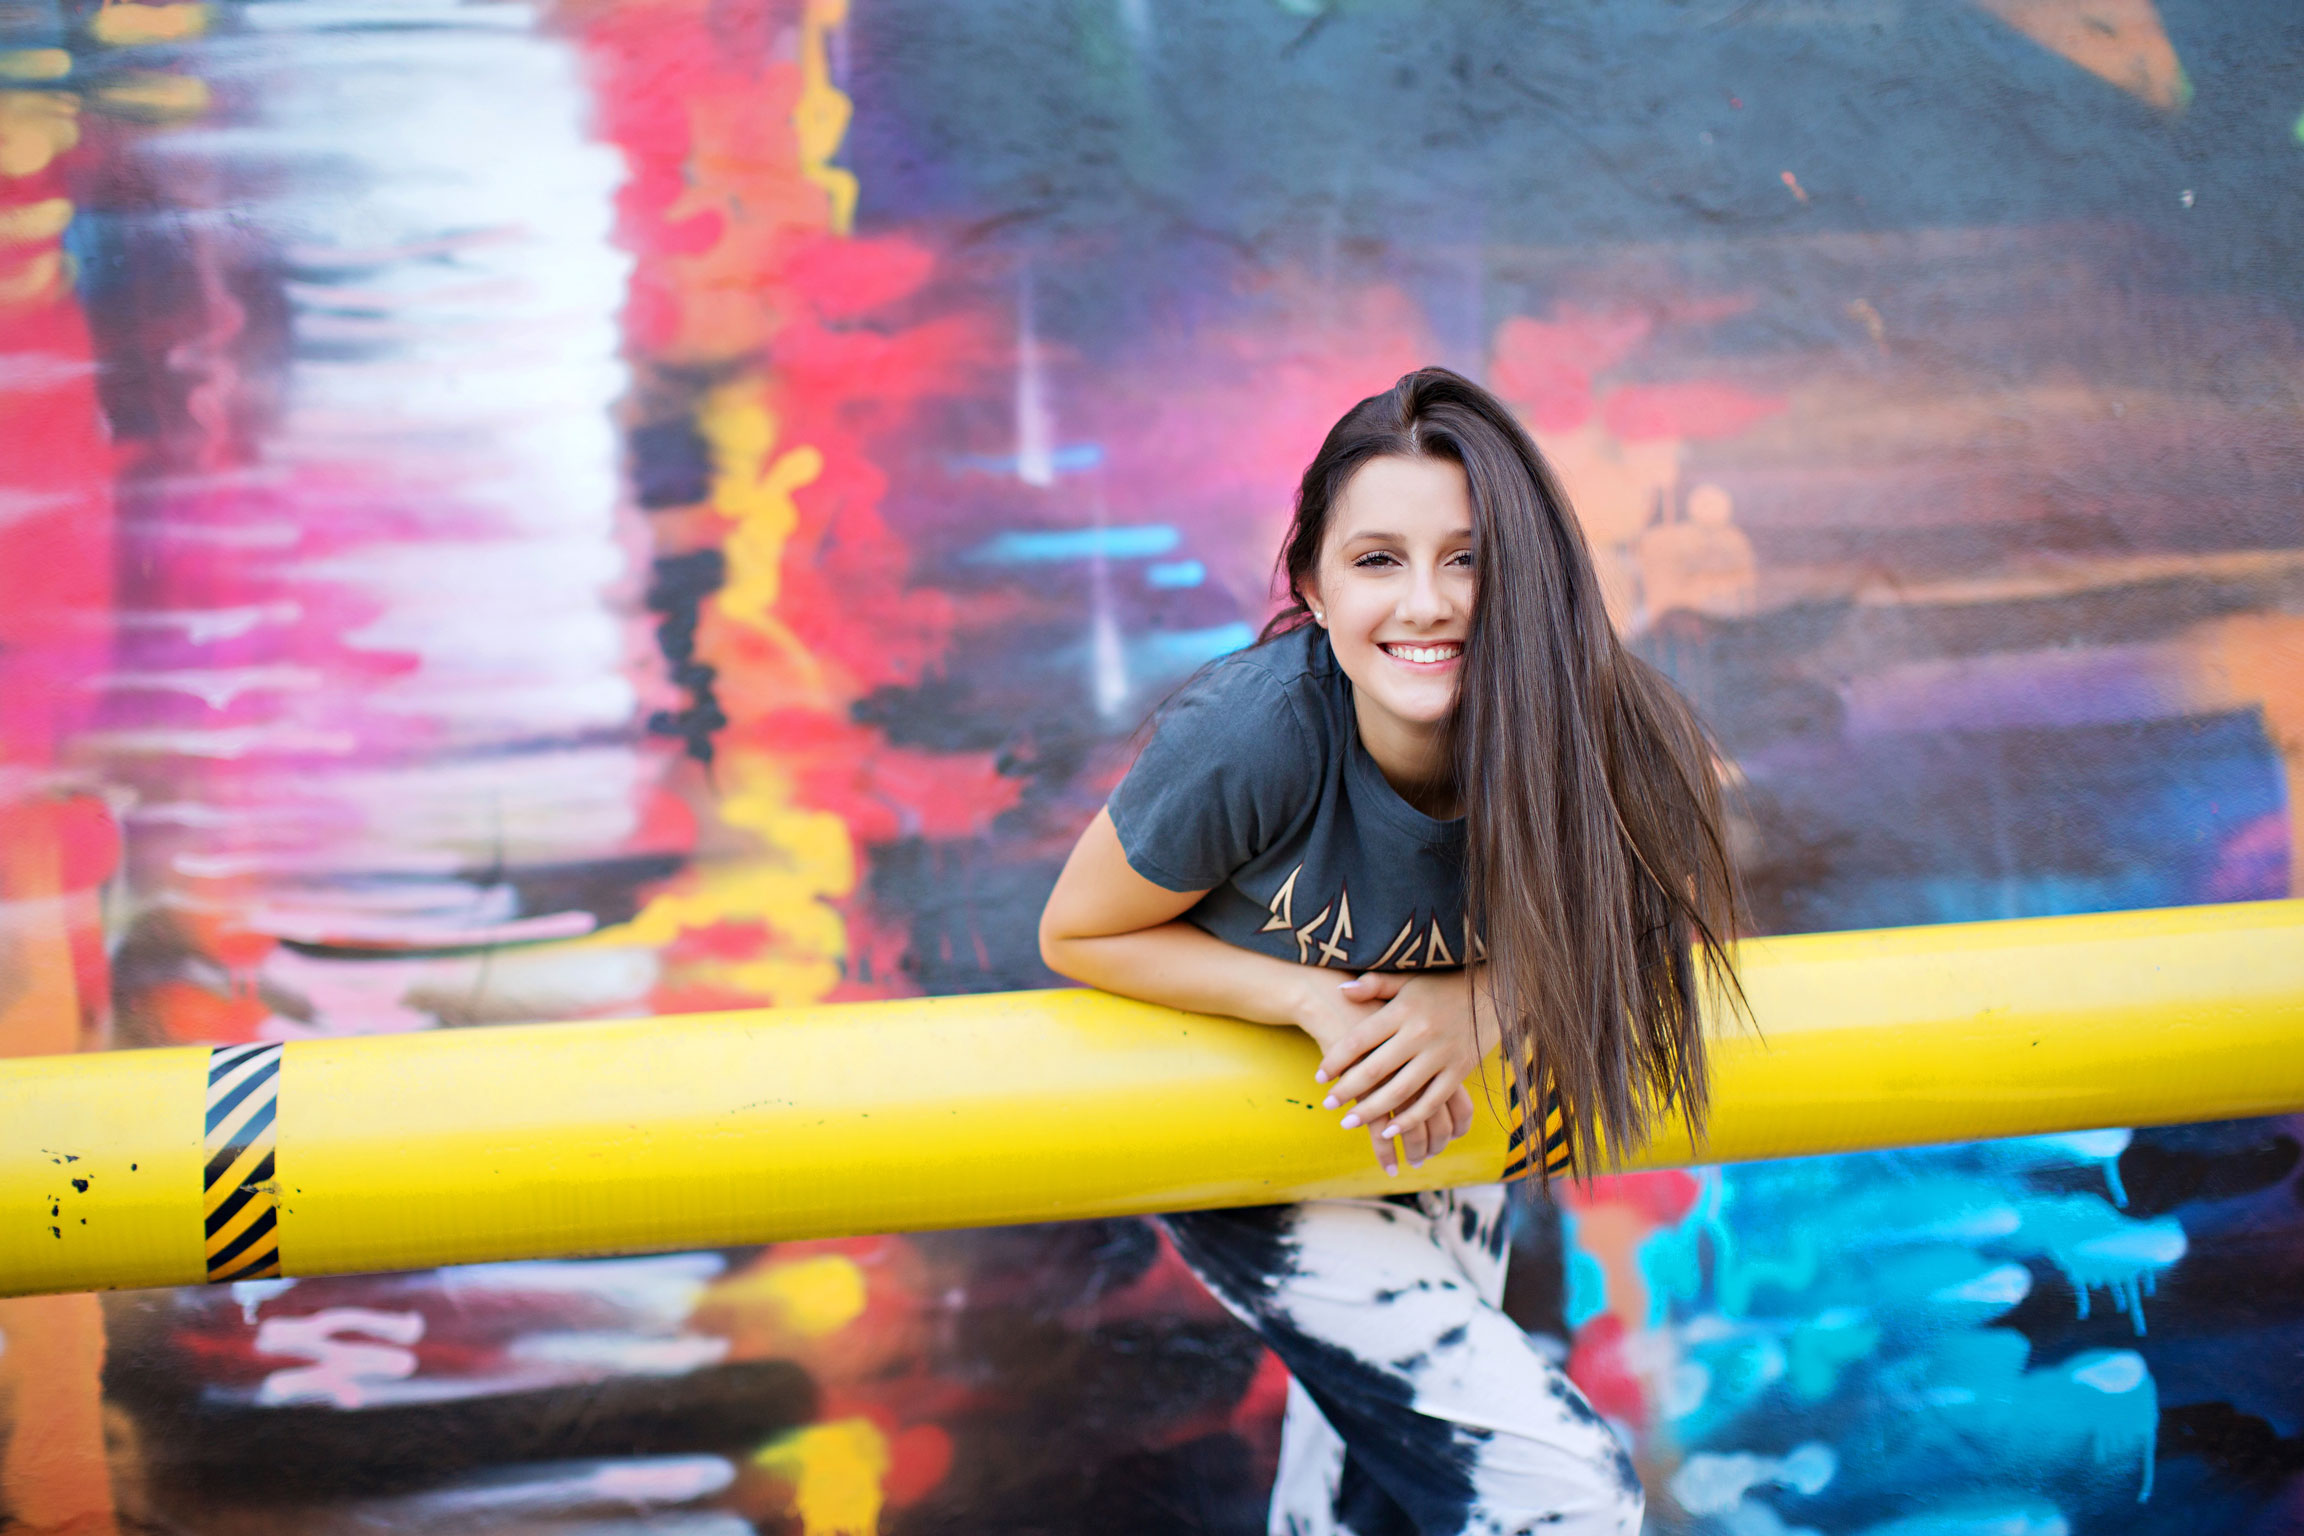 Smiling girl leaning against yellow rail with mural background